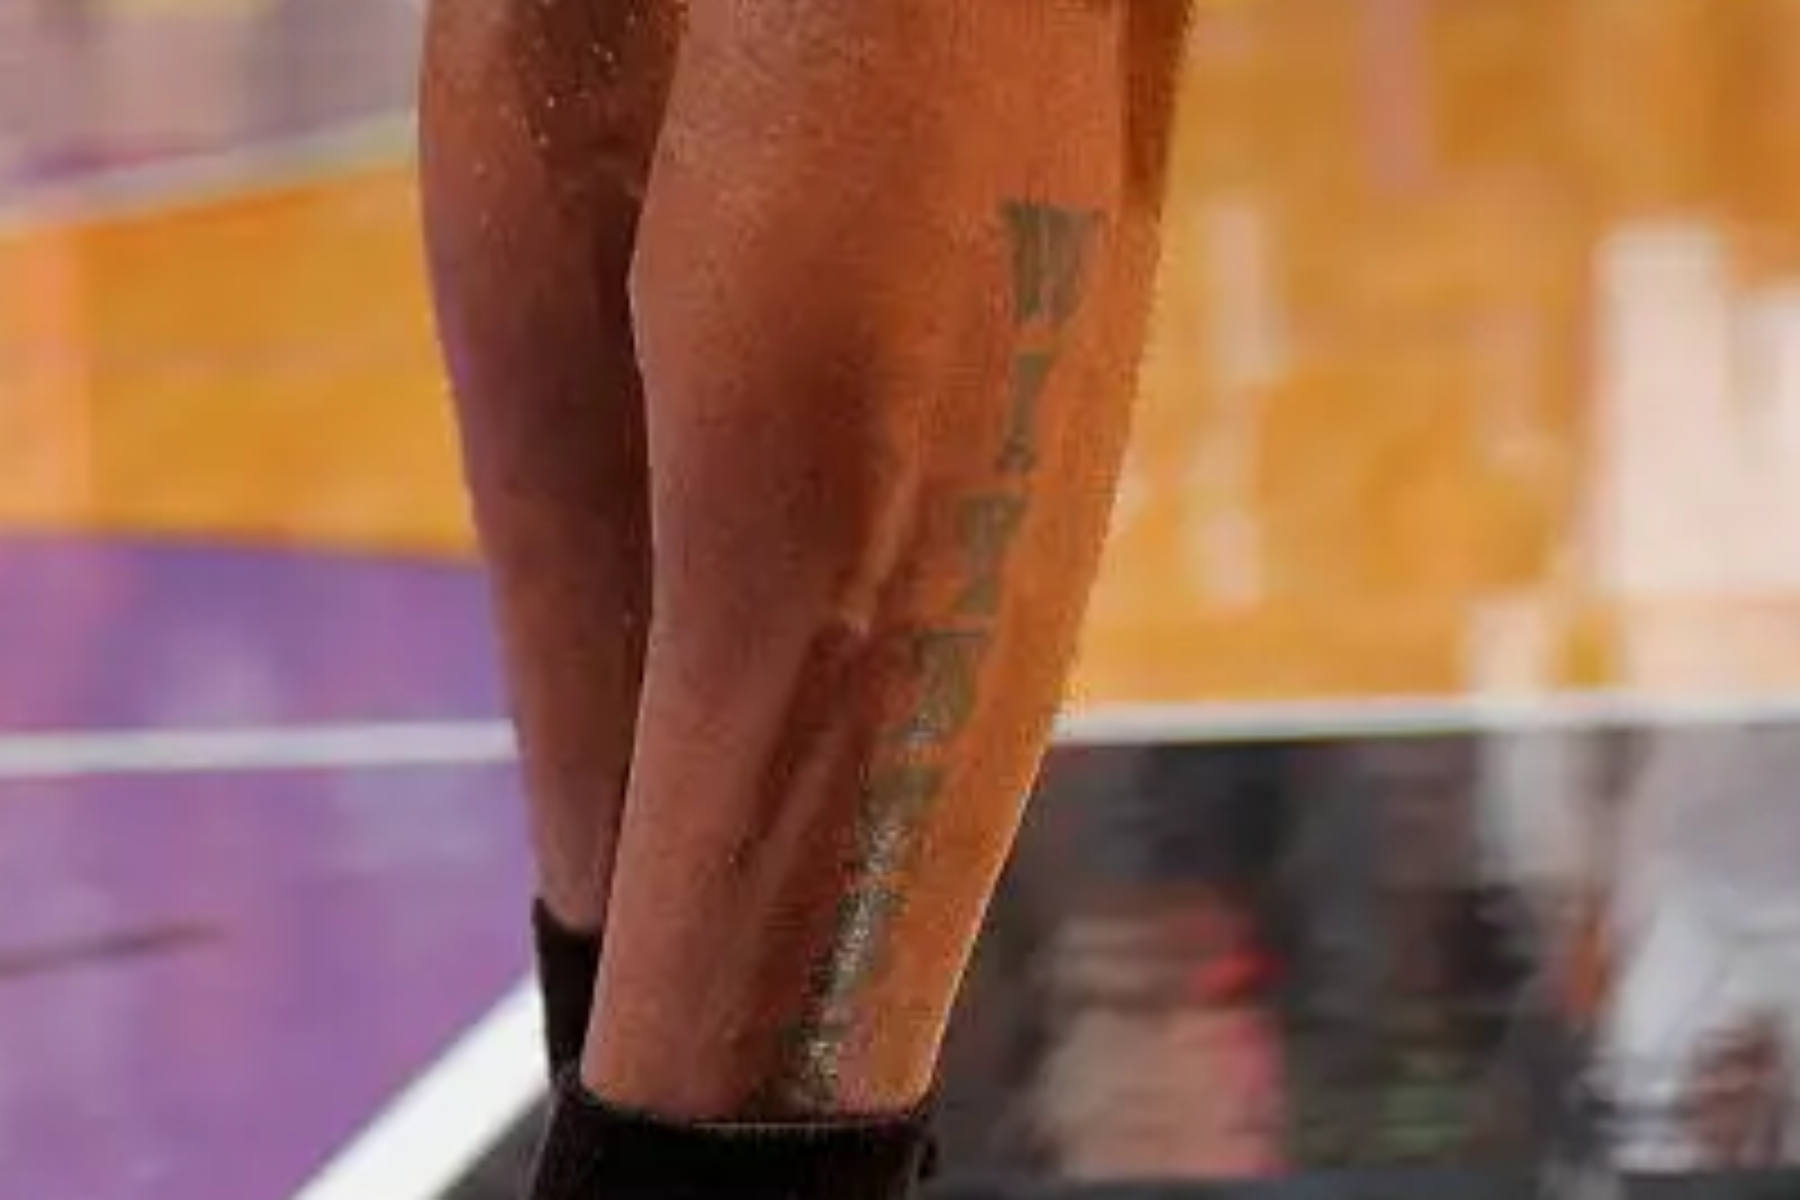 LeBron James has a witness tattoo on his right leg